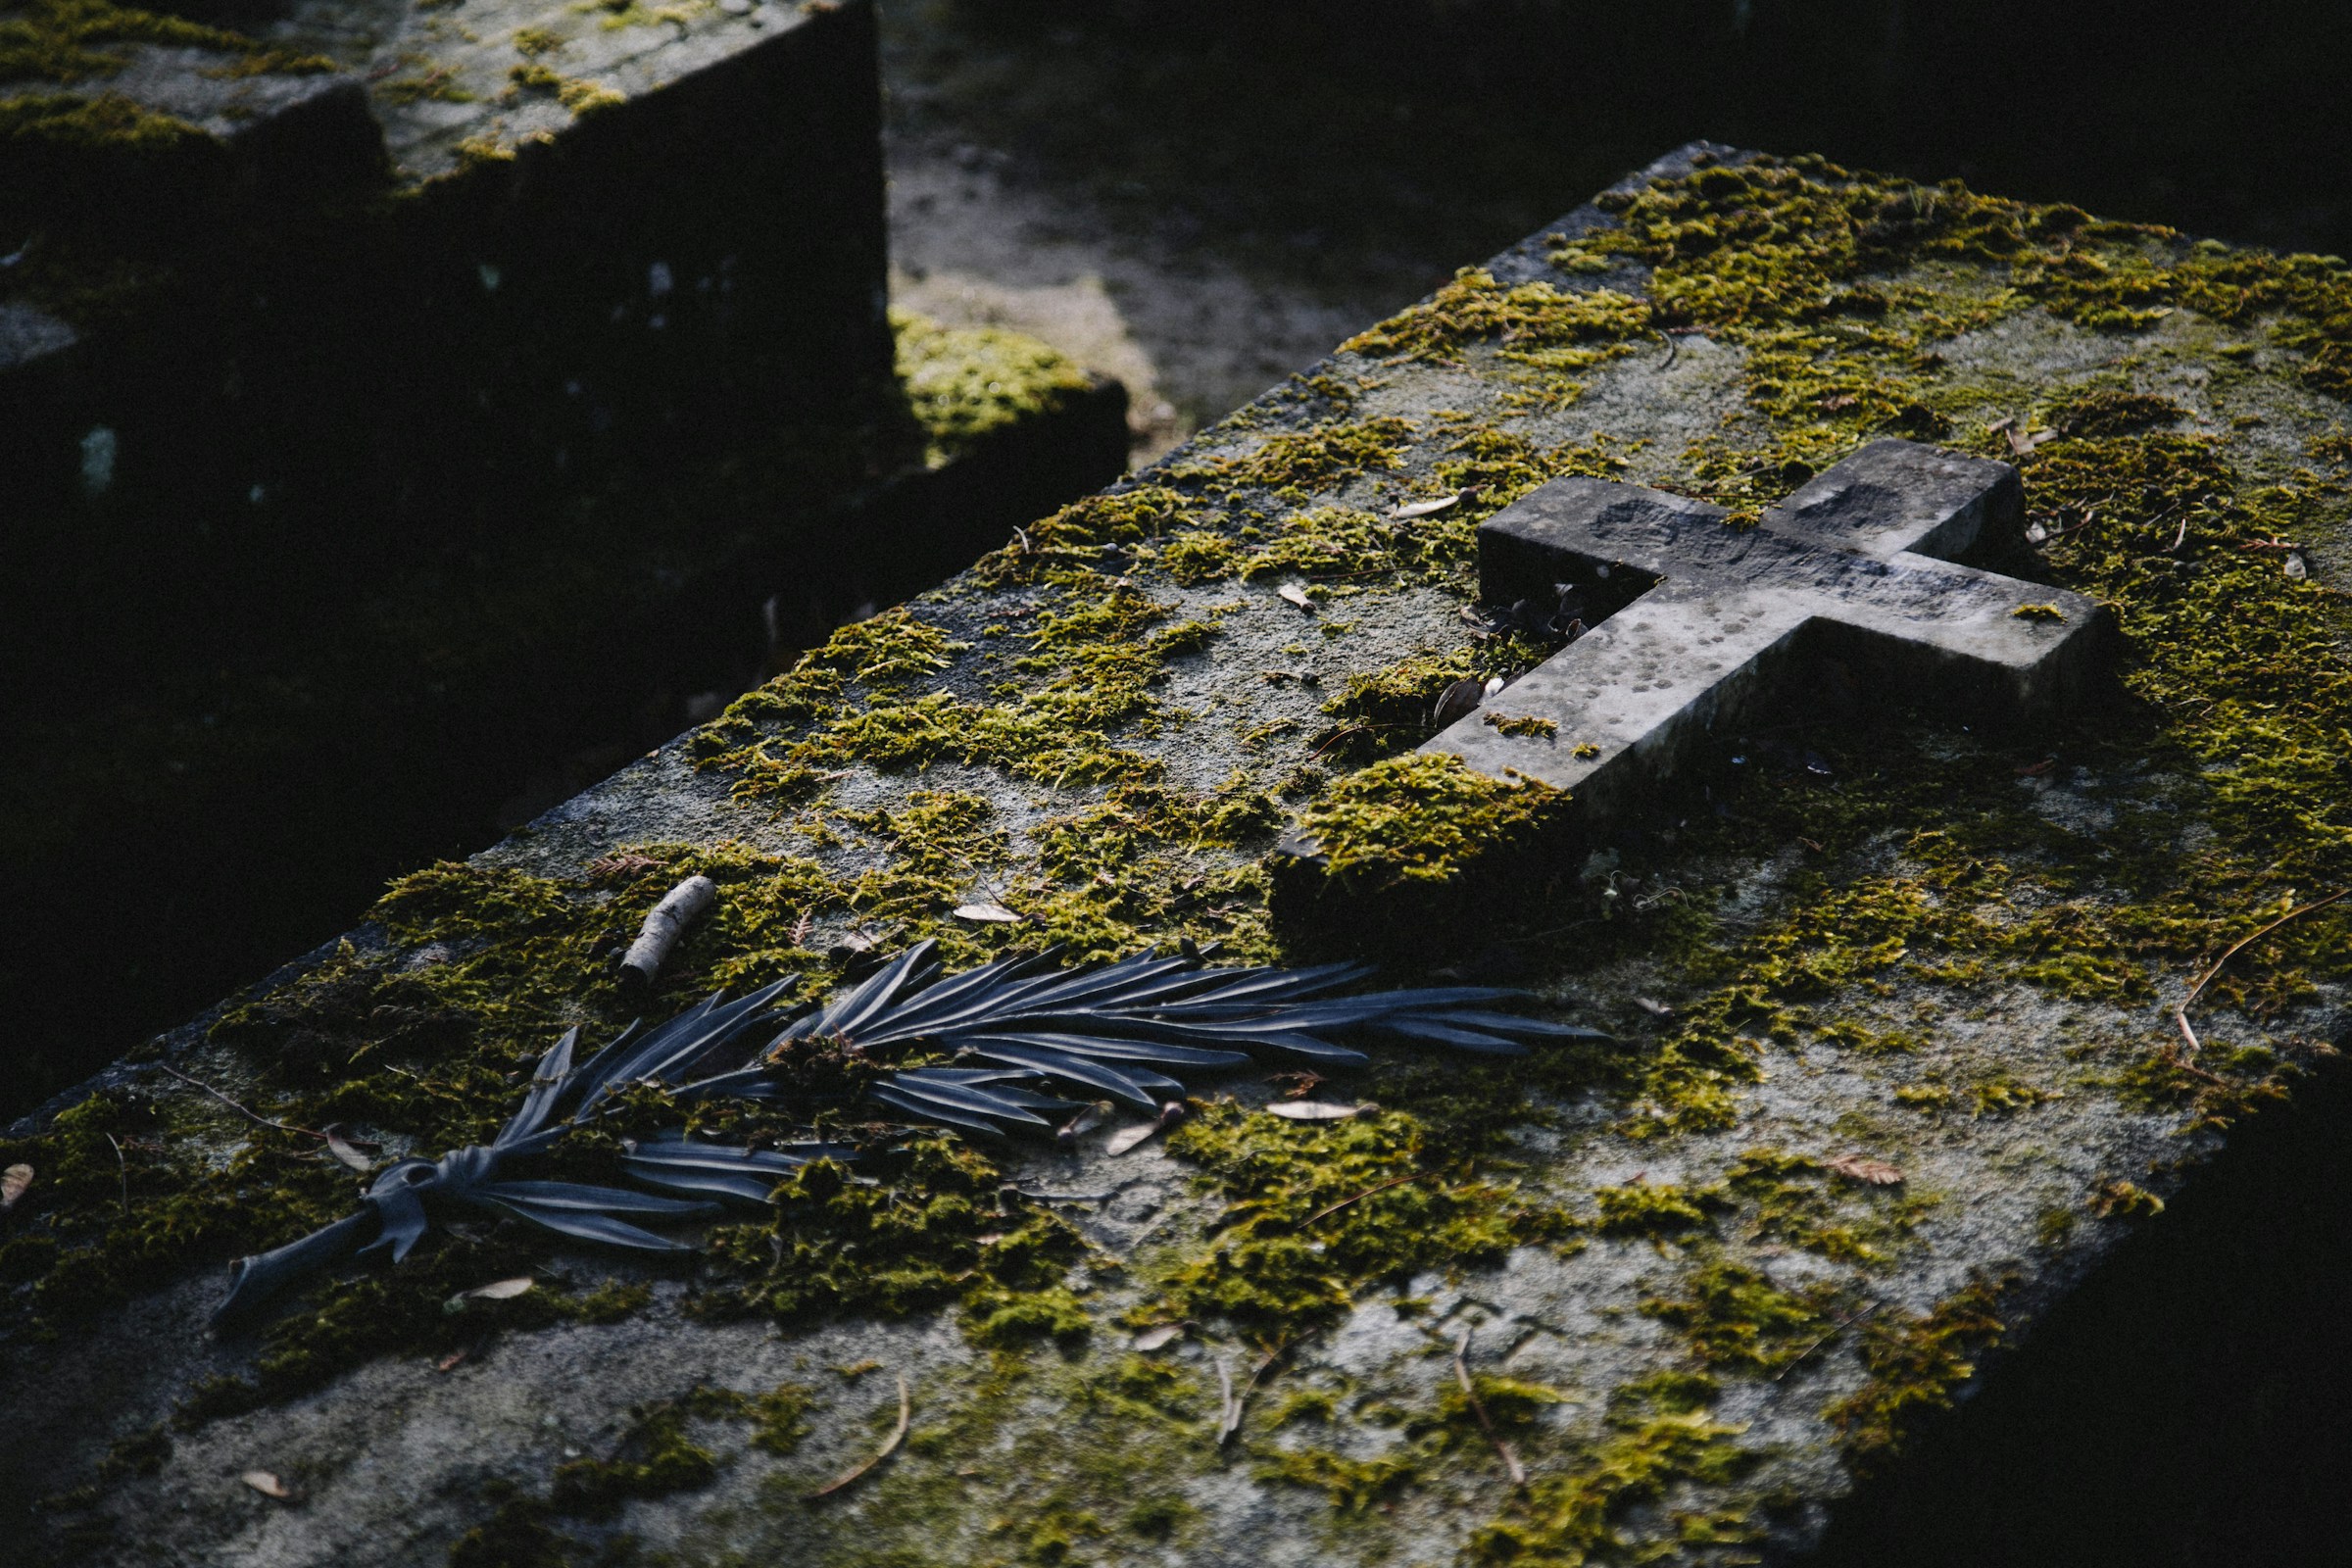 A gravestone covered in moss | Source: Unsplash